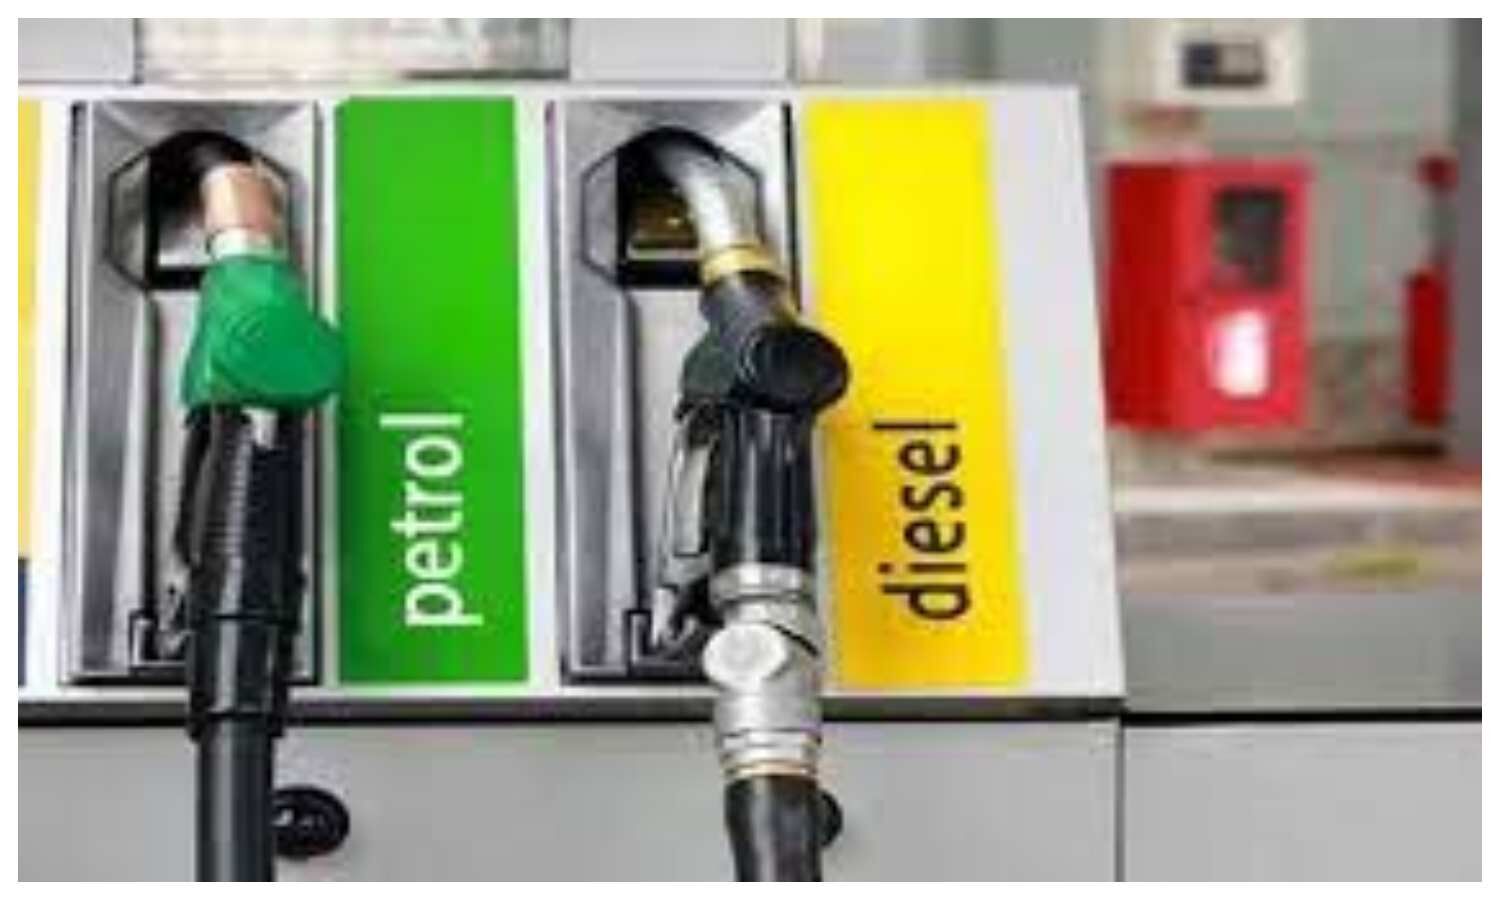 Petrol Diesel Price Today: Latest rates of petrol diesel released, know today’s price from Delhi to UP